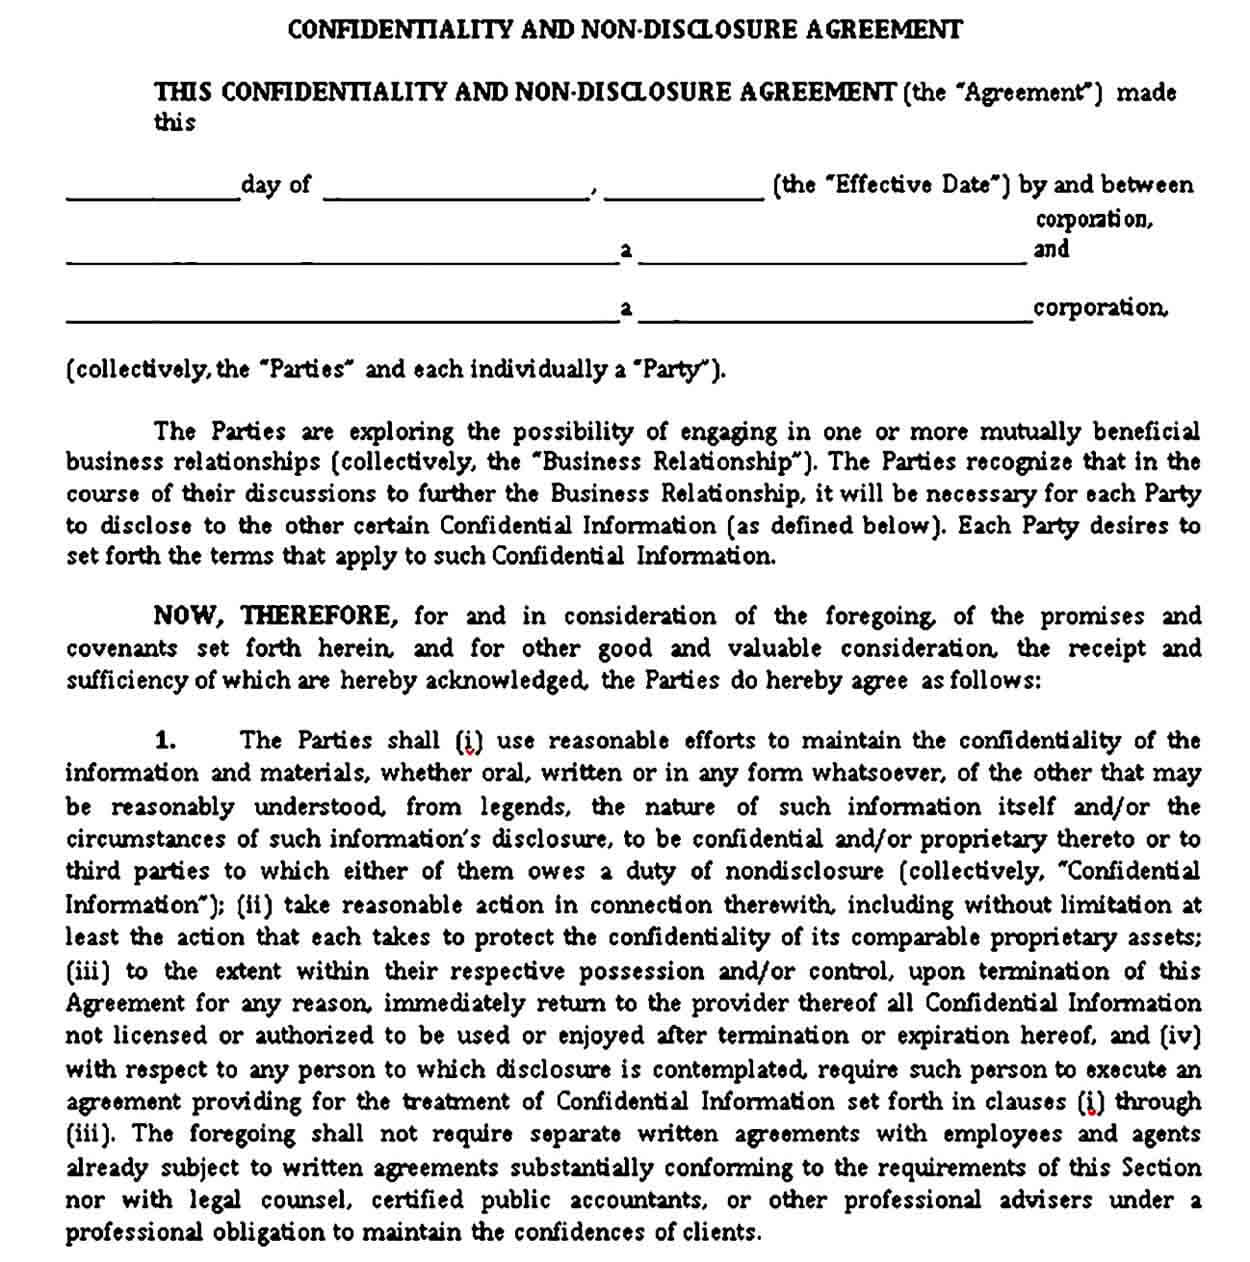 Non Disclosure Confidentiality Agreement